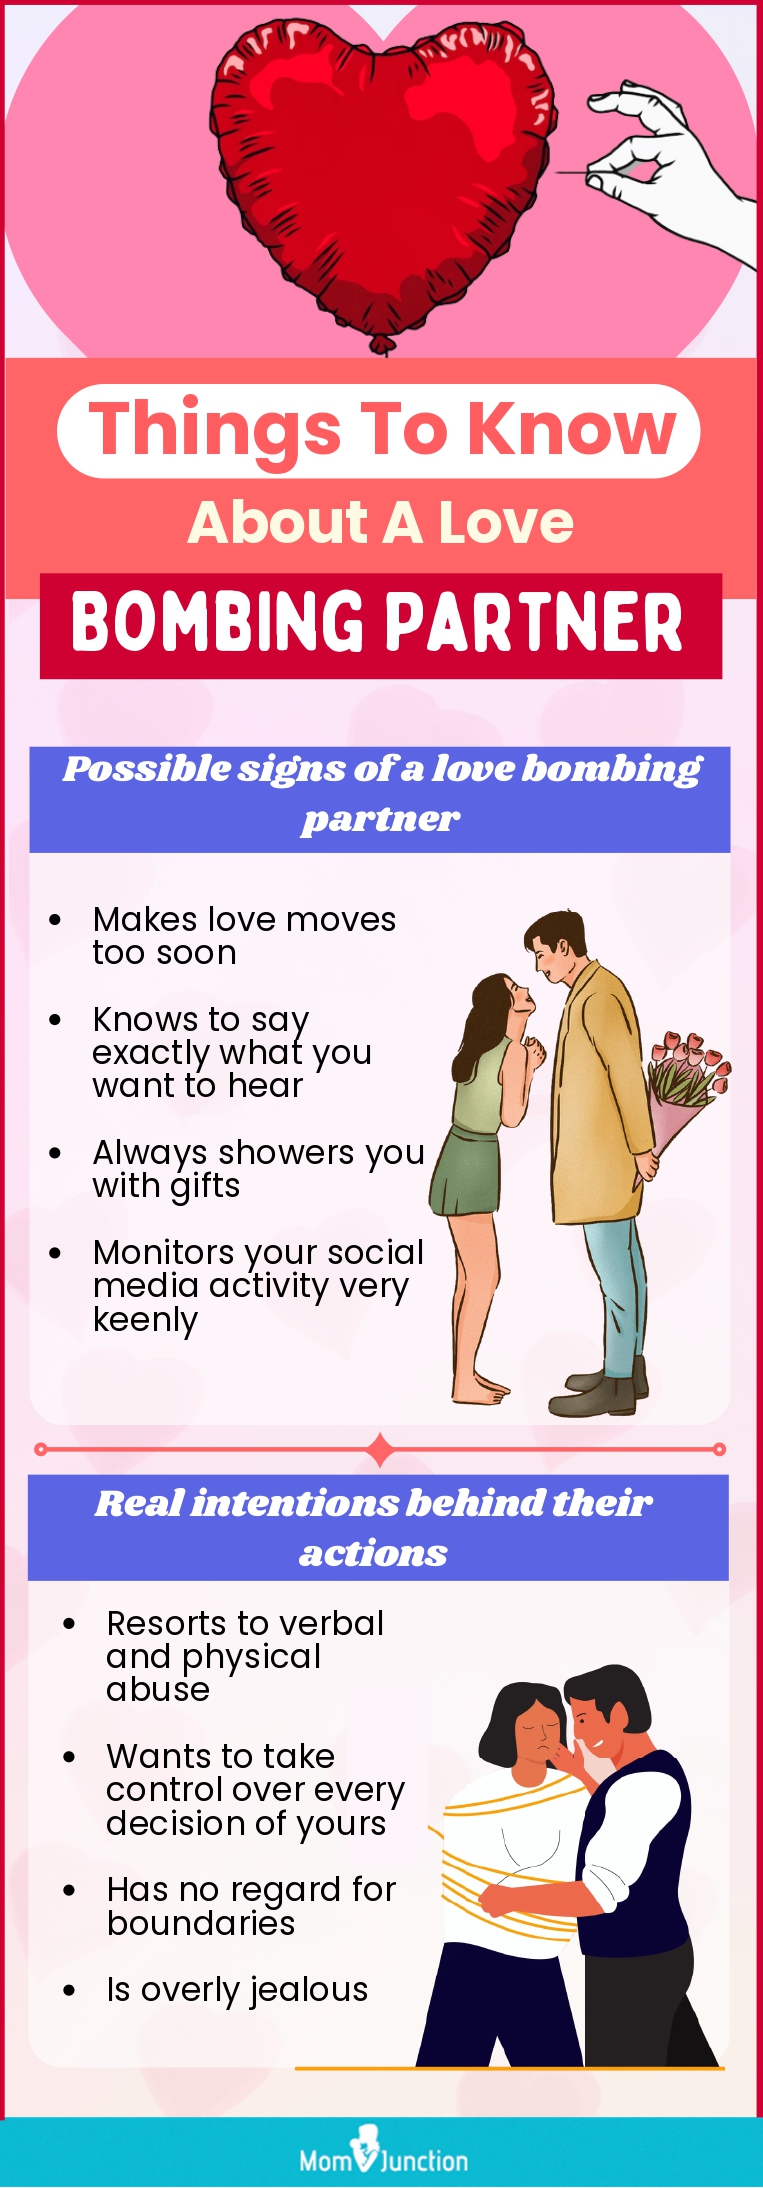 Love Bombing: What It Is and Signs to Look For In a Partner - The New York  Times